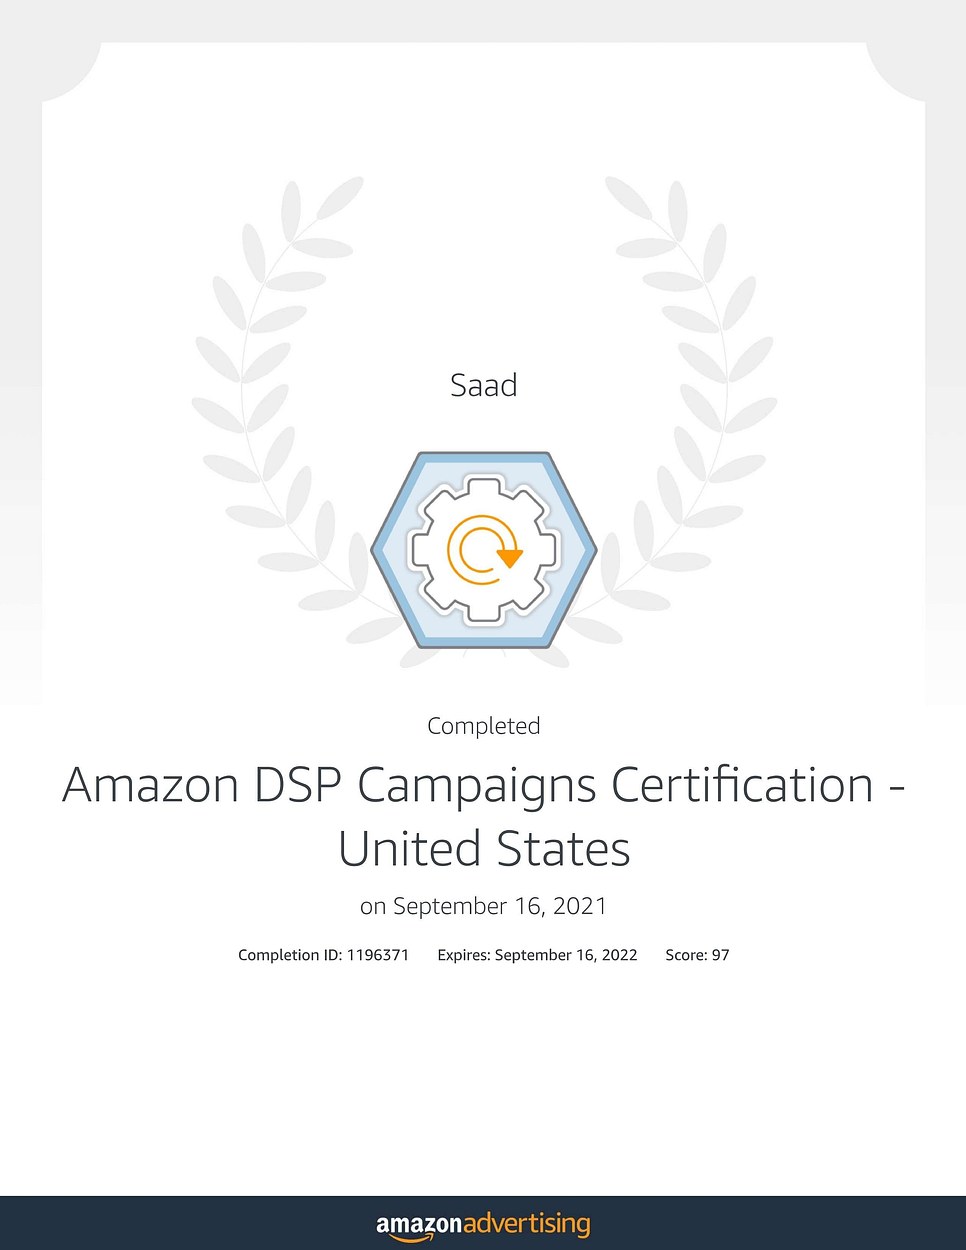 Amazon DSP Campaigns Certification- United States